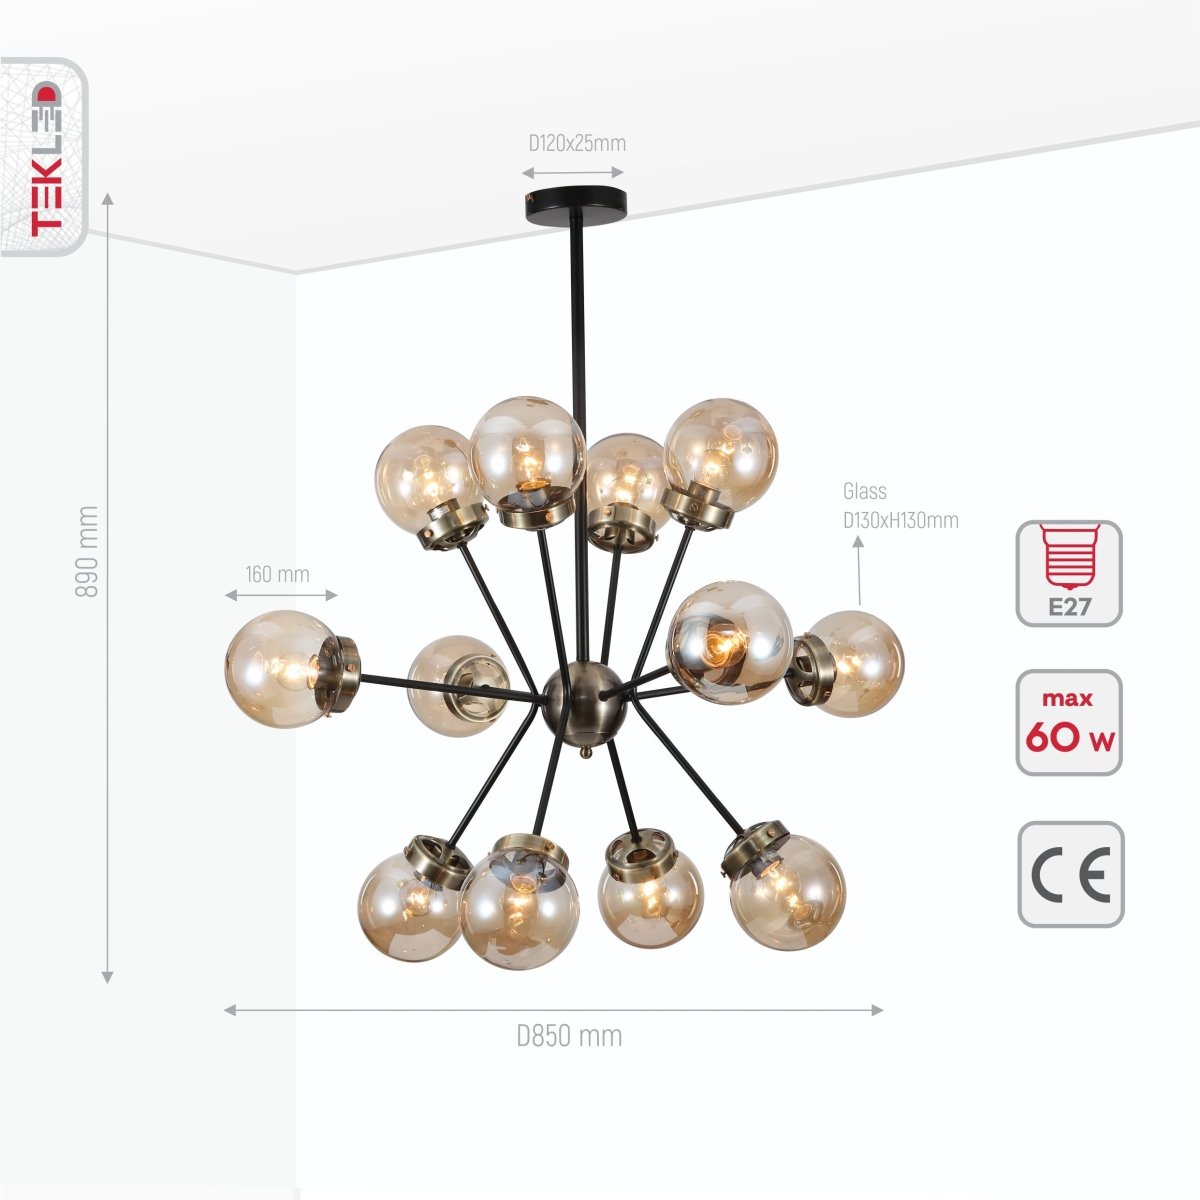 Product dimensions of amber glass globe black and antique brass semi flush ceiling light 12xe27